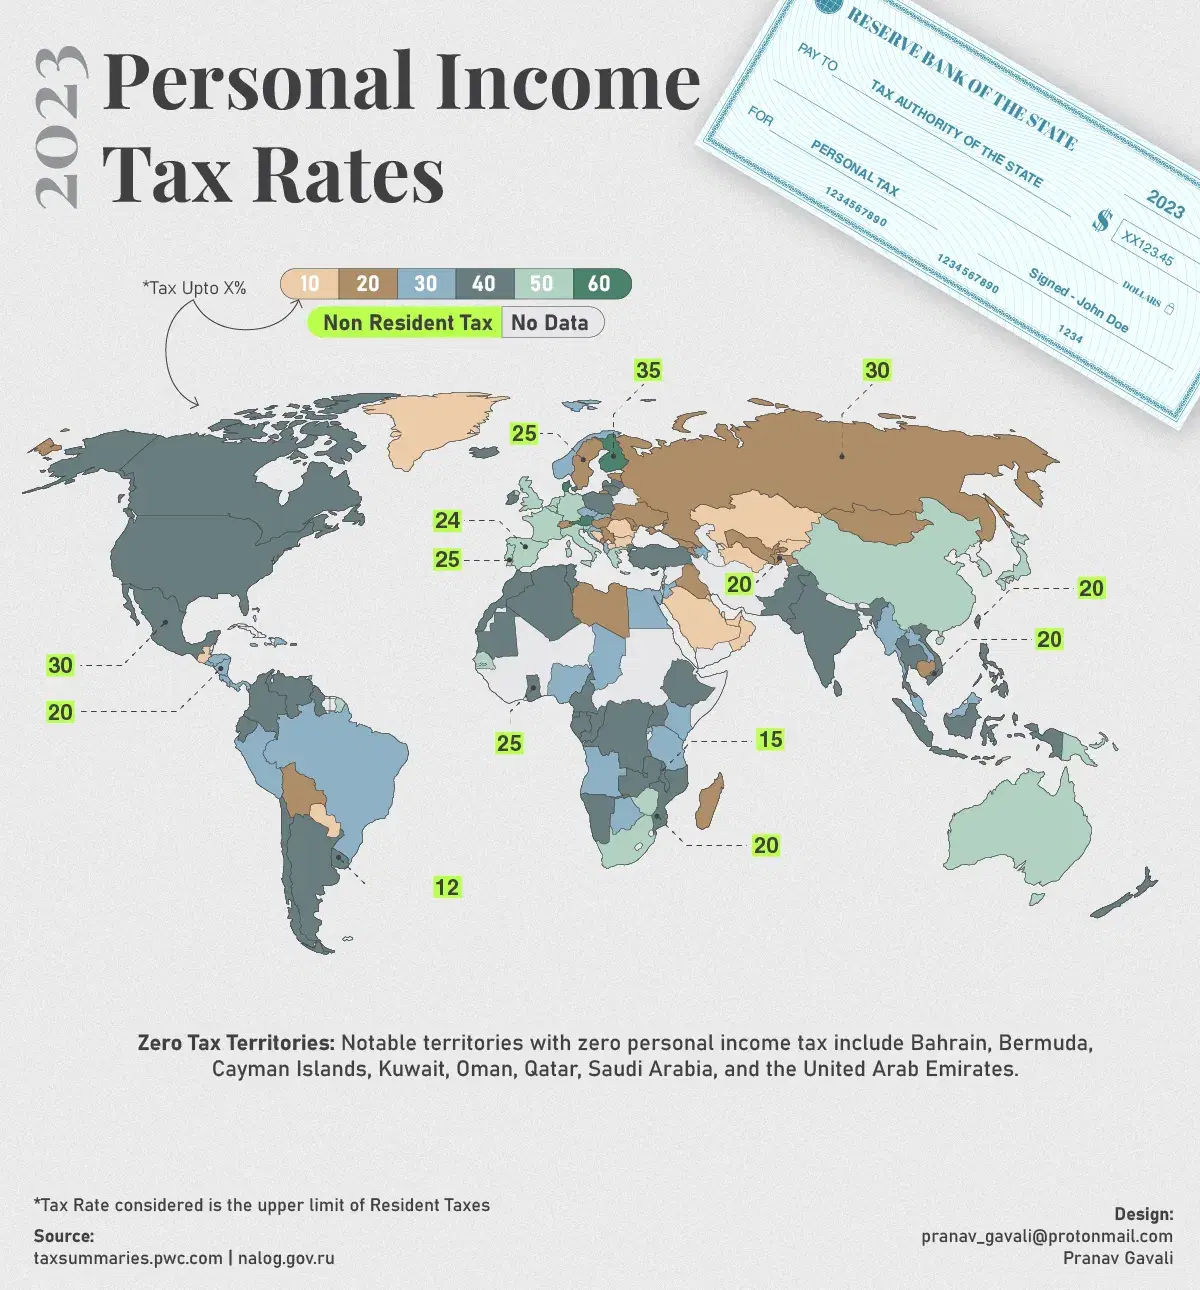 Global Personal Income Tax Rates